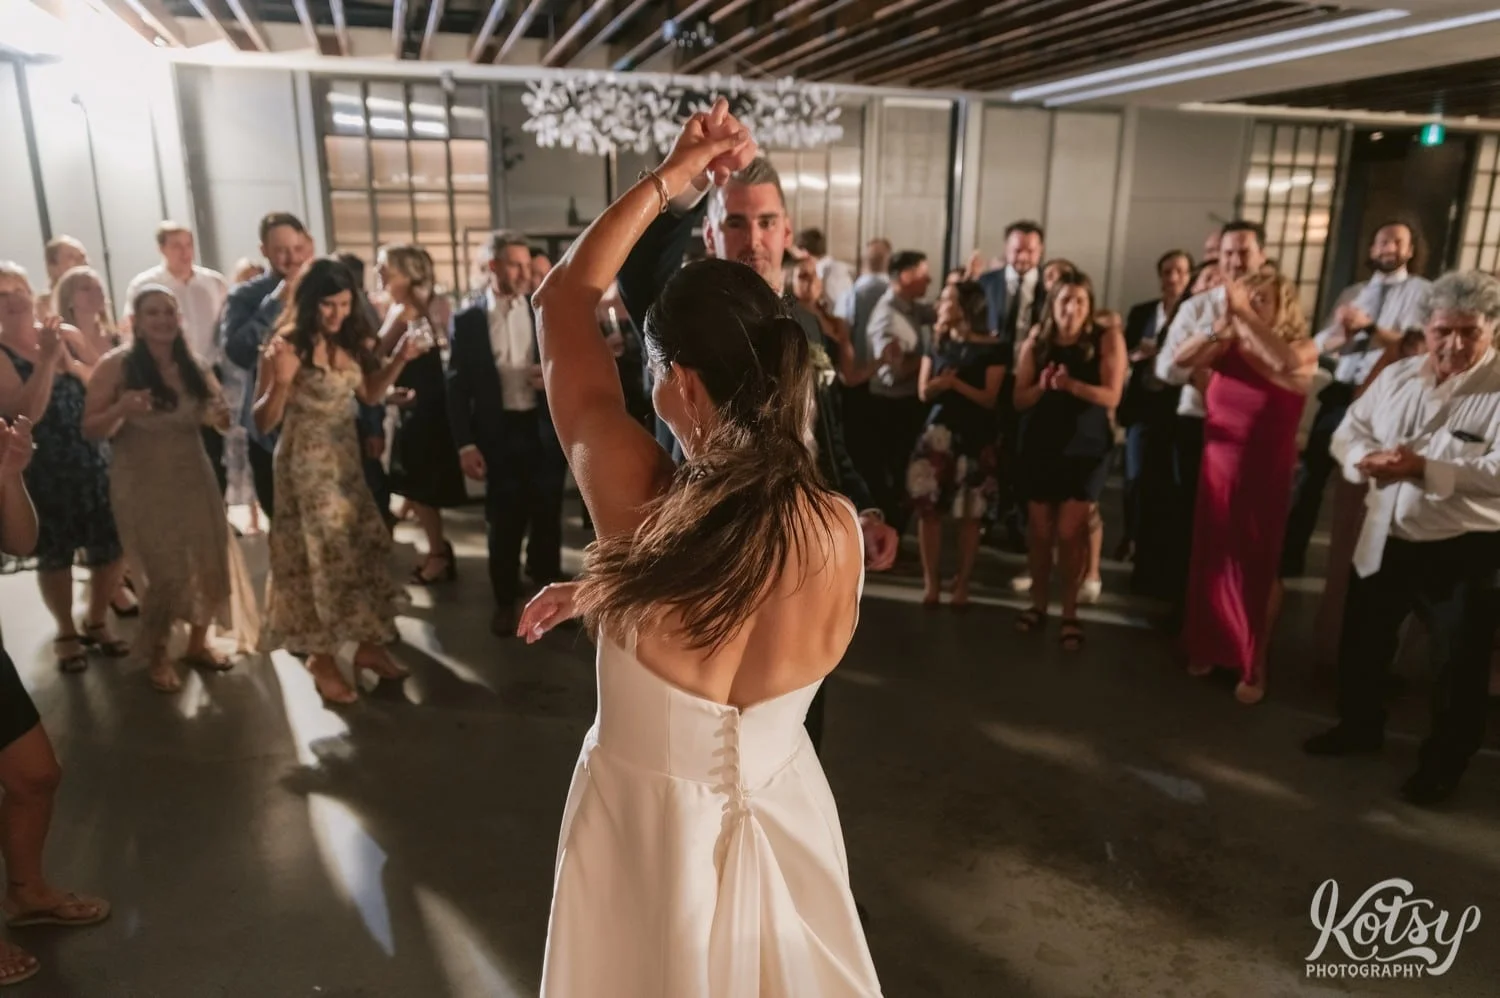 A bride's hand is raised by the groom during a dance at their Village Loft wedding reception in Toronto, Canada